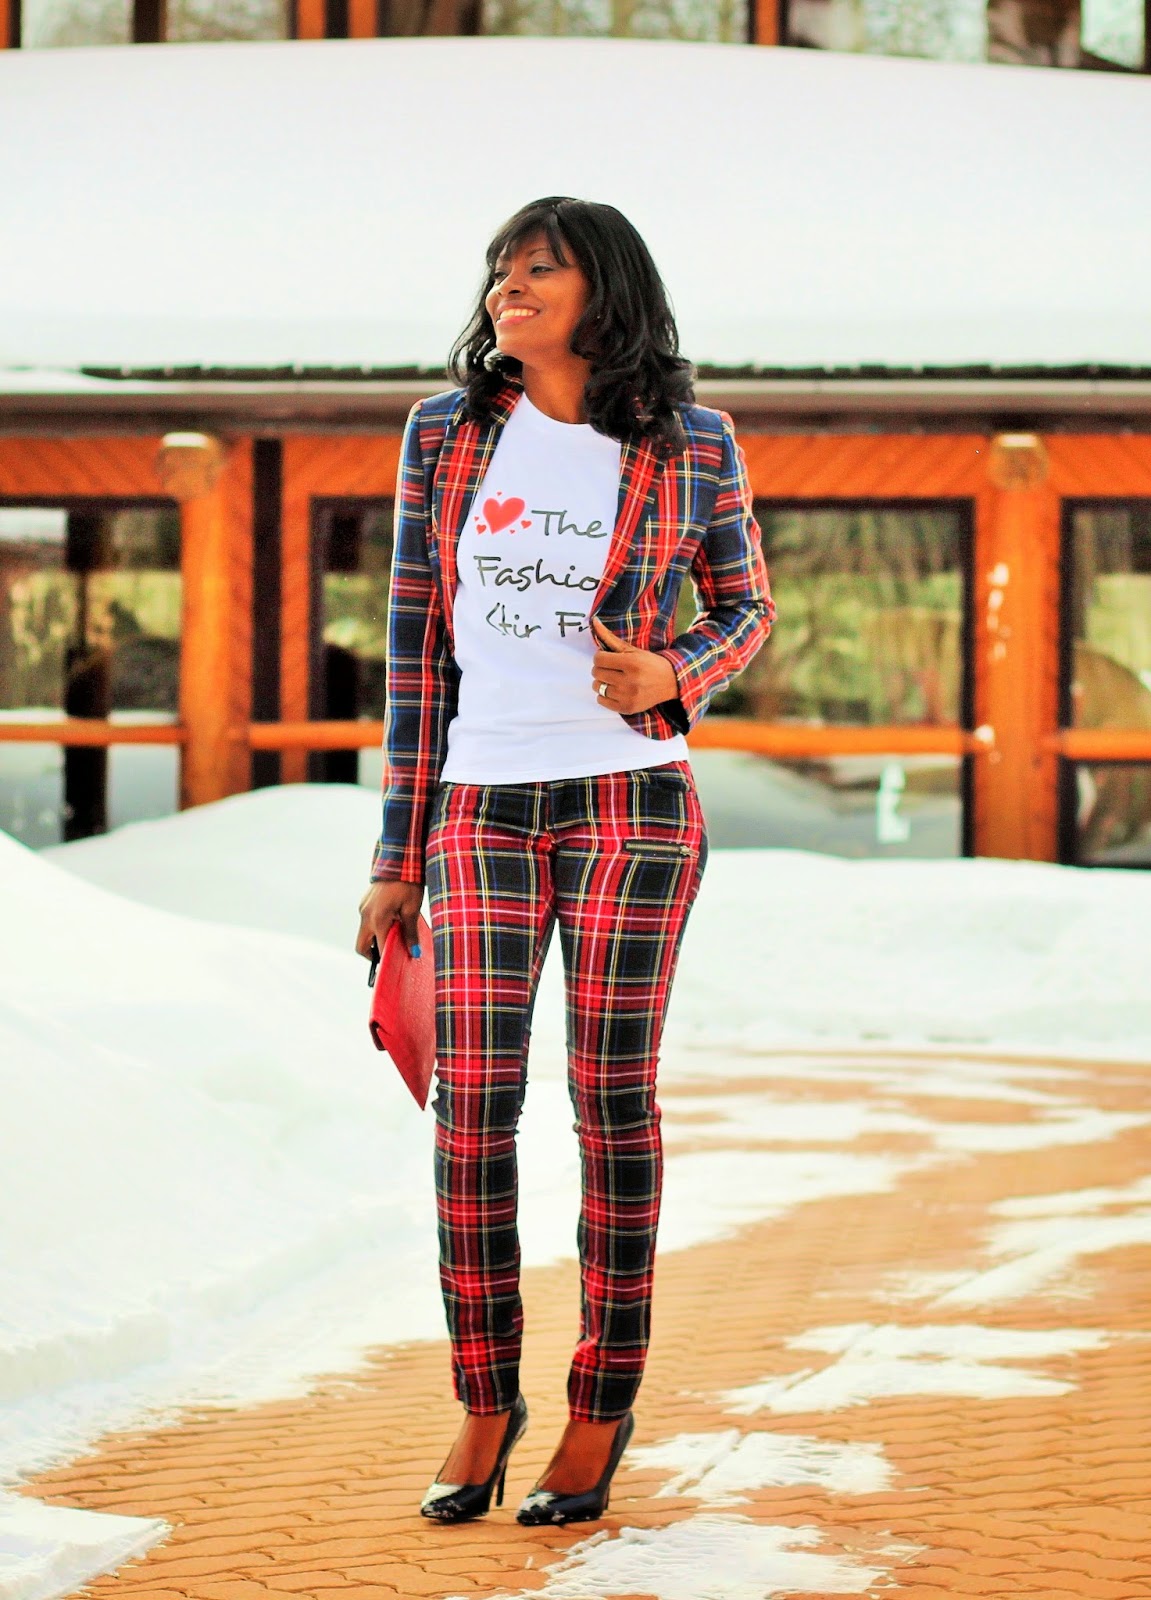 Perfect plaid outfit